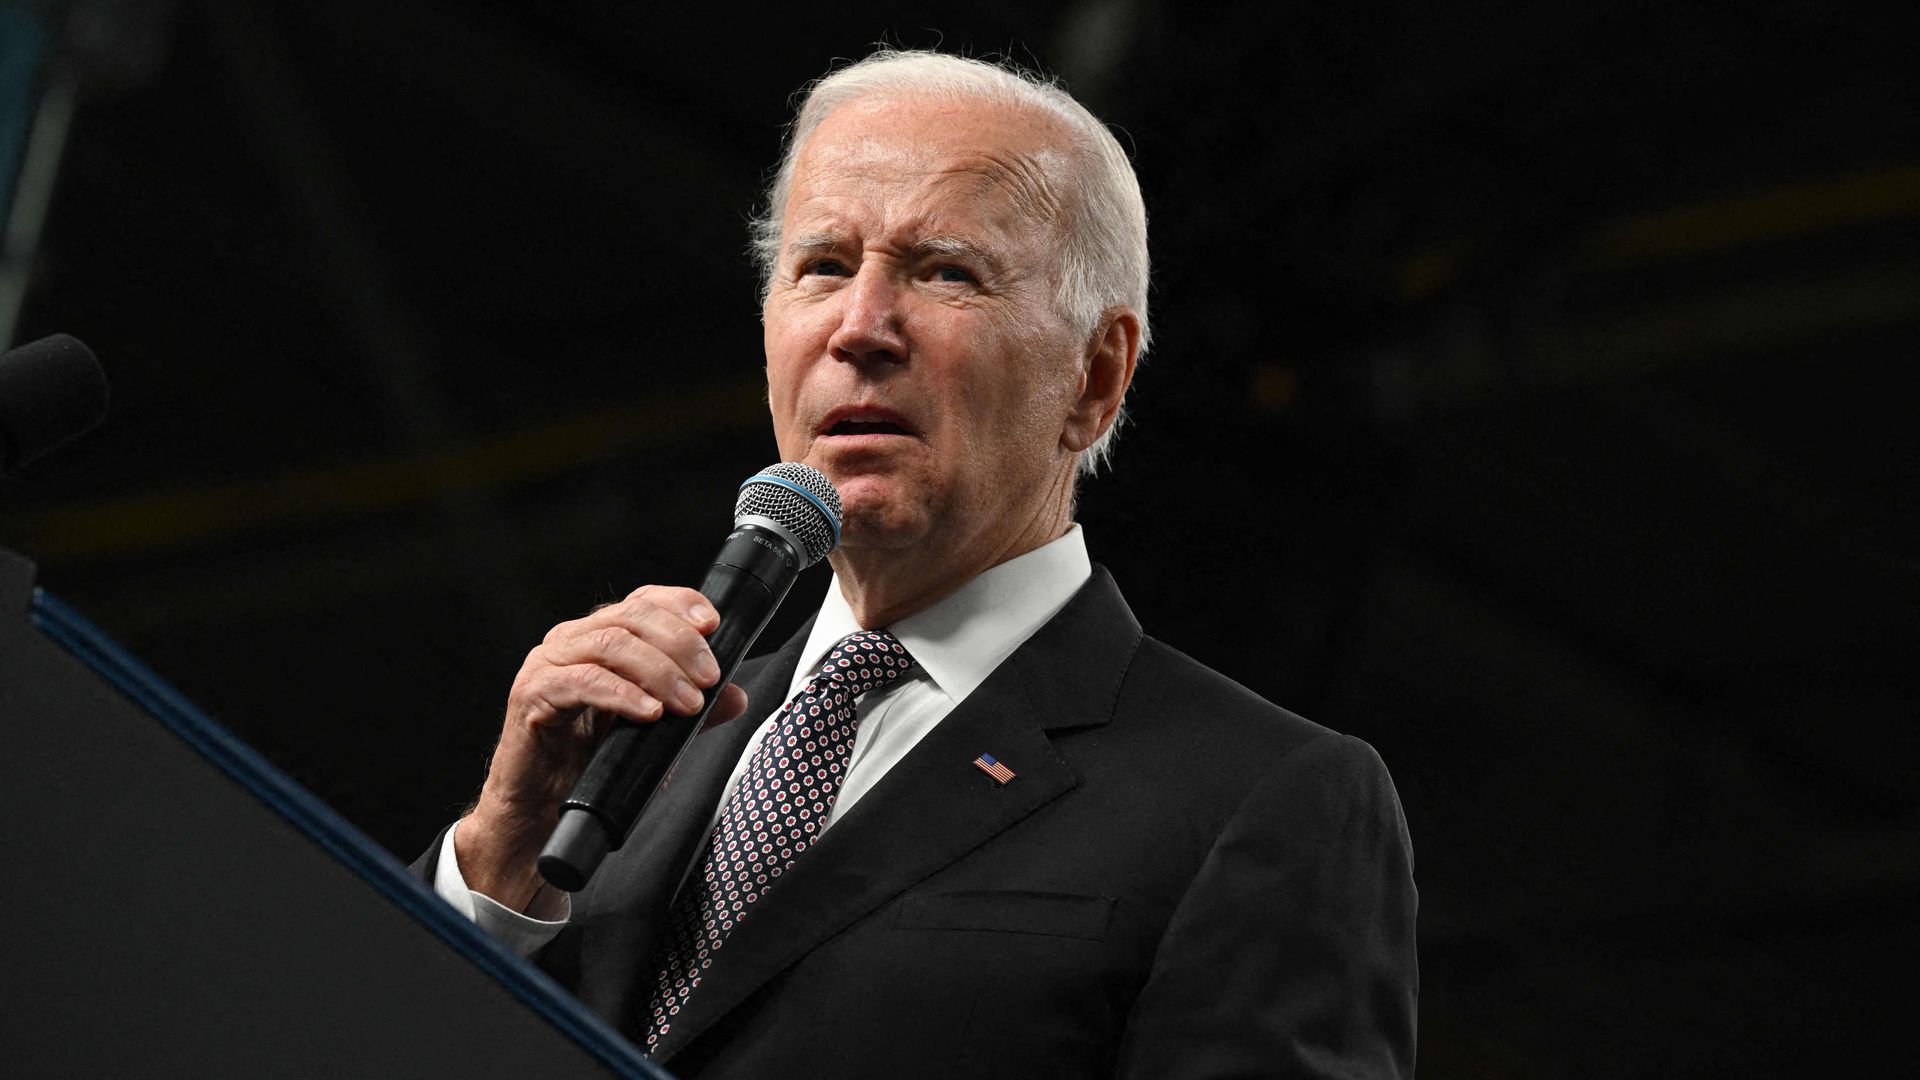 President Joe Biden delivers remarks at the IBM facility in Poughkeepsie, New York.